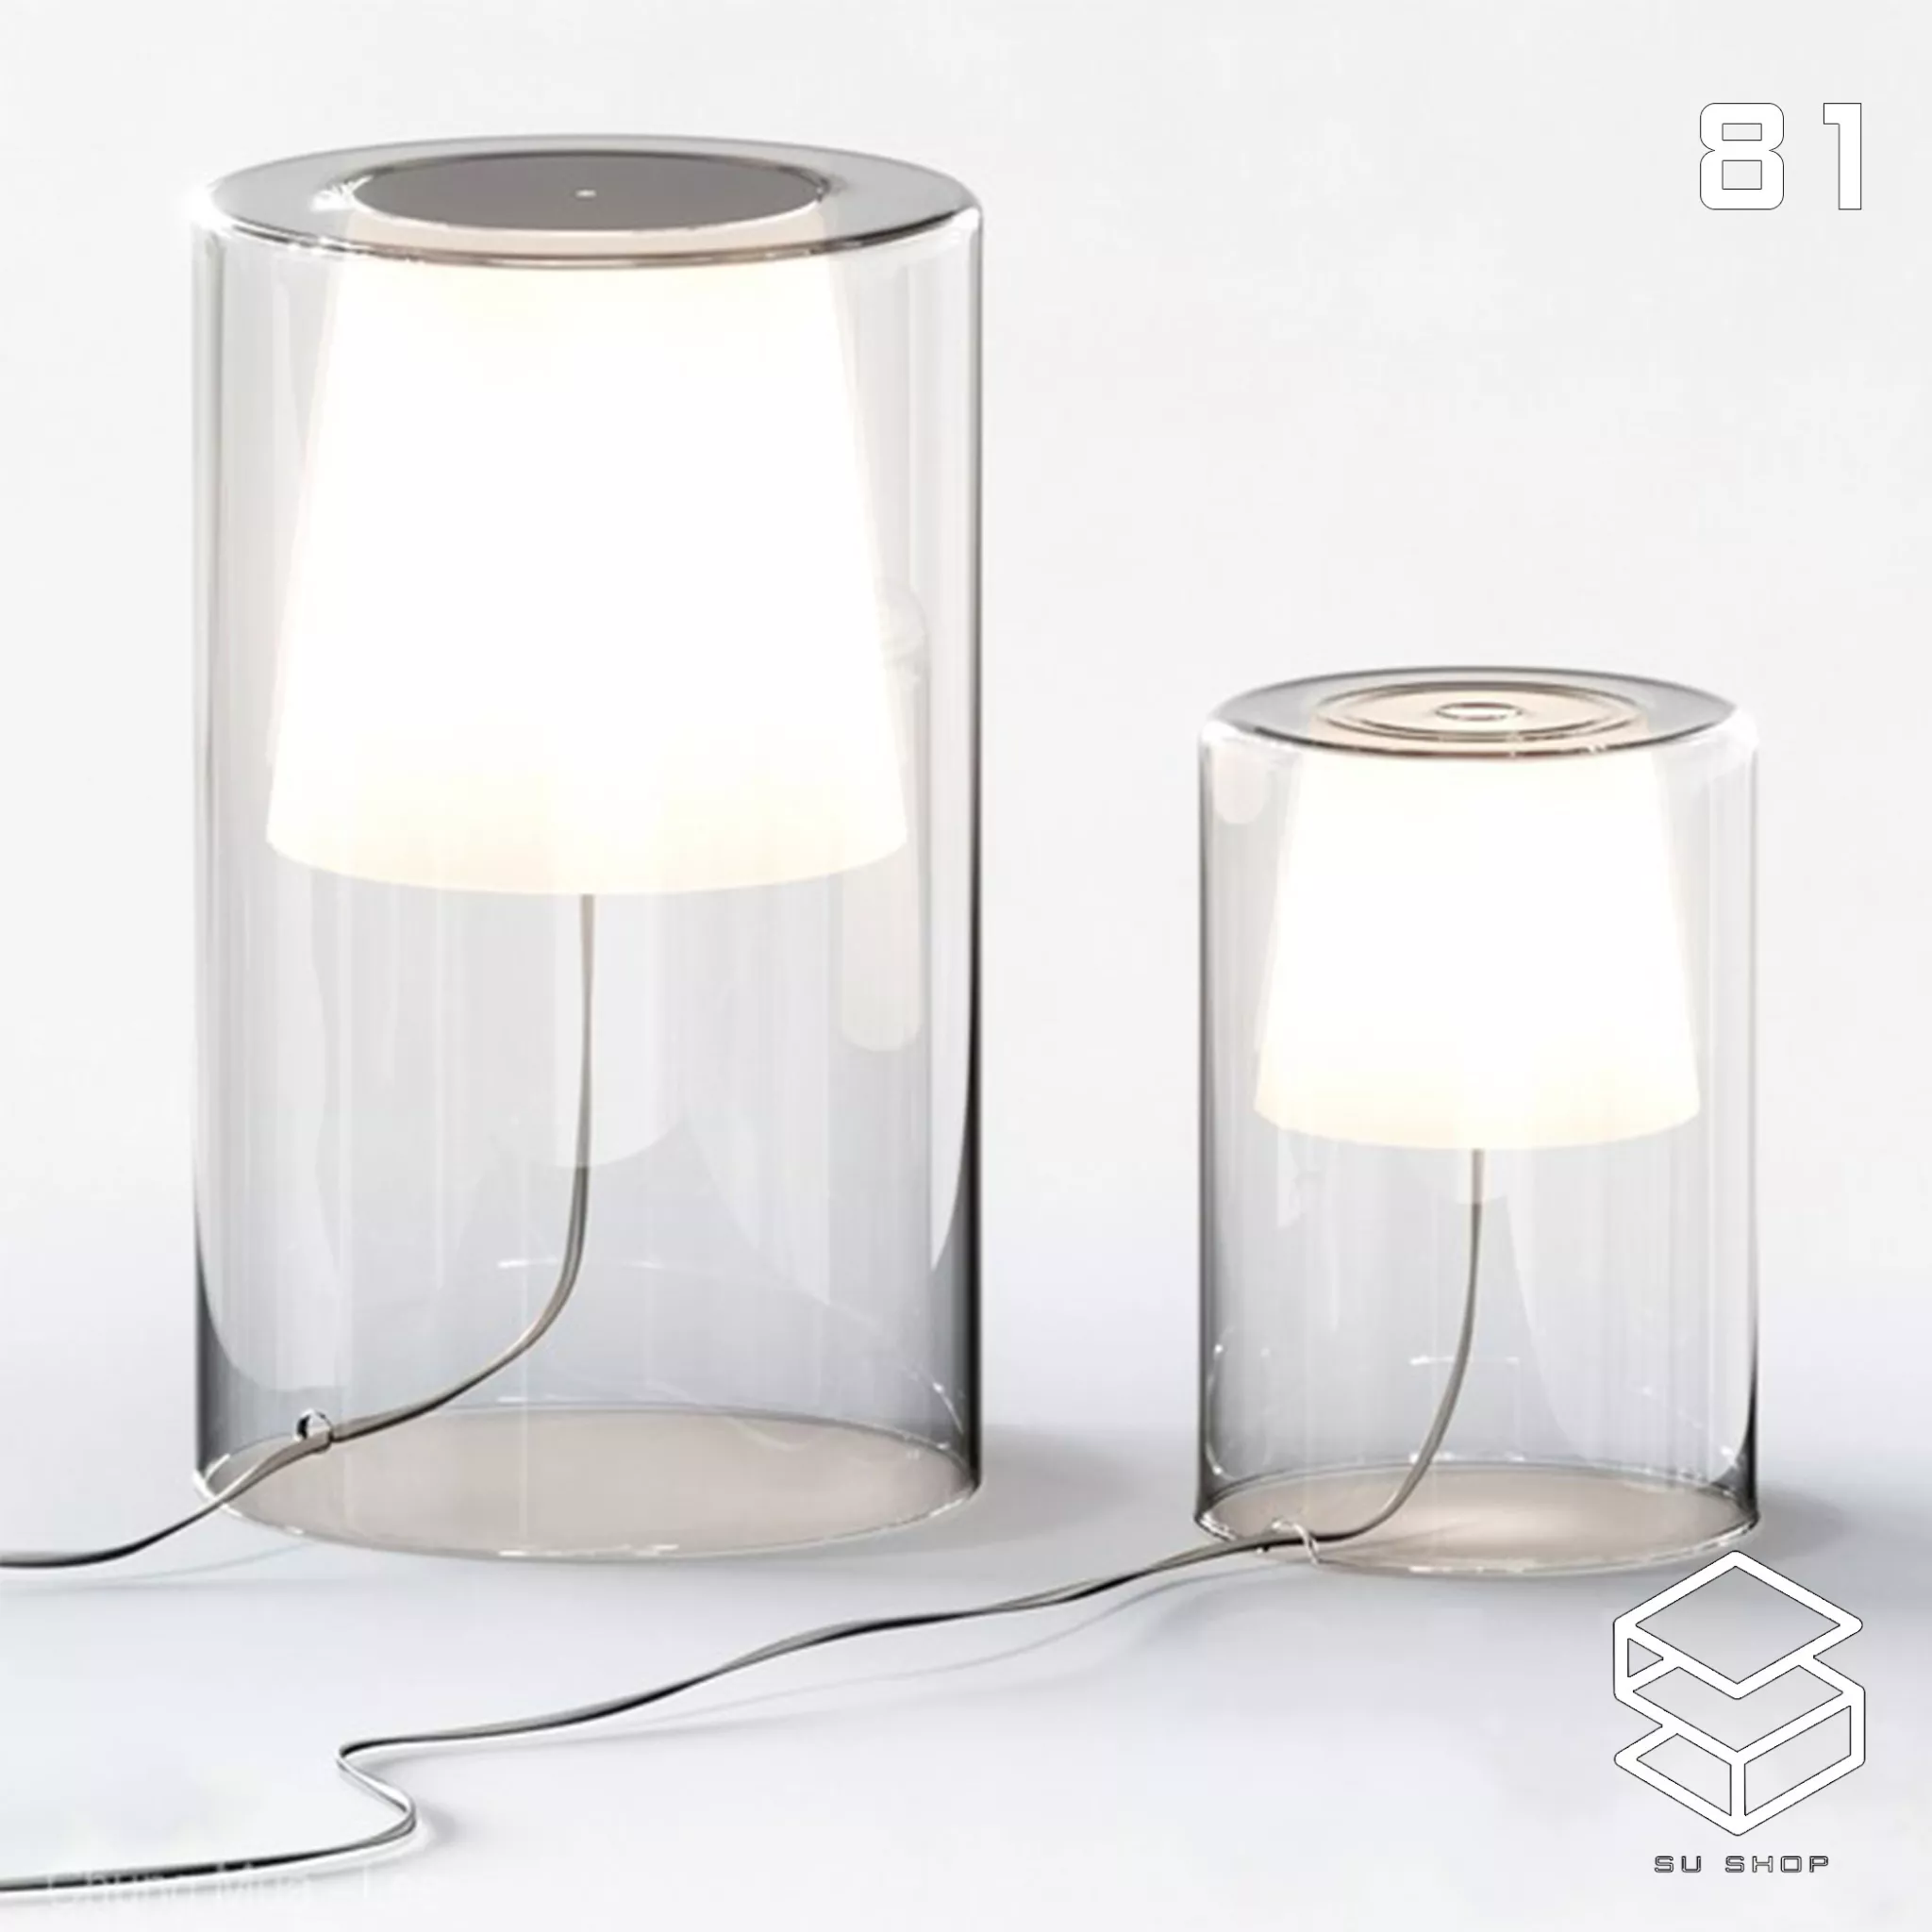 MODERN TABLE LAMP - SKETCHUP 3D MODEL - VRAY OR ENSCAPE - ID14879